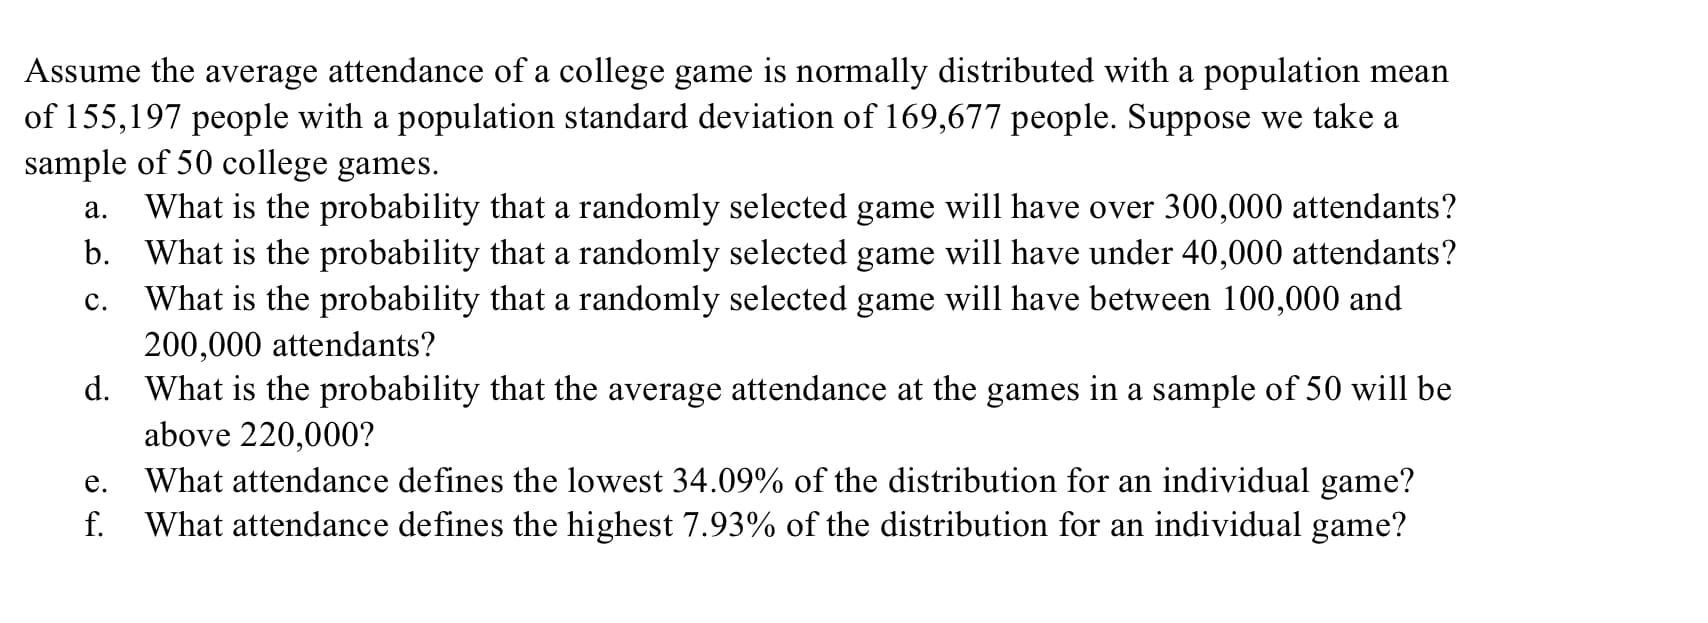 Assume the average attendance of a college game is normally distributed with a population mean
of 155,197 people with a population standard deviation of 169,677 people. Suppose we take a
sample of 50 college games.
What is the probability that a randomly selected game will have over 300,000 attendants?
b. What is the probability that a randomly selected game will have under 40,000 attendants?
What is the probability that a randomly selected game will have between 100,000 and
200,000 attendants?
а.
с.
